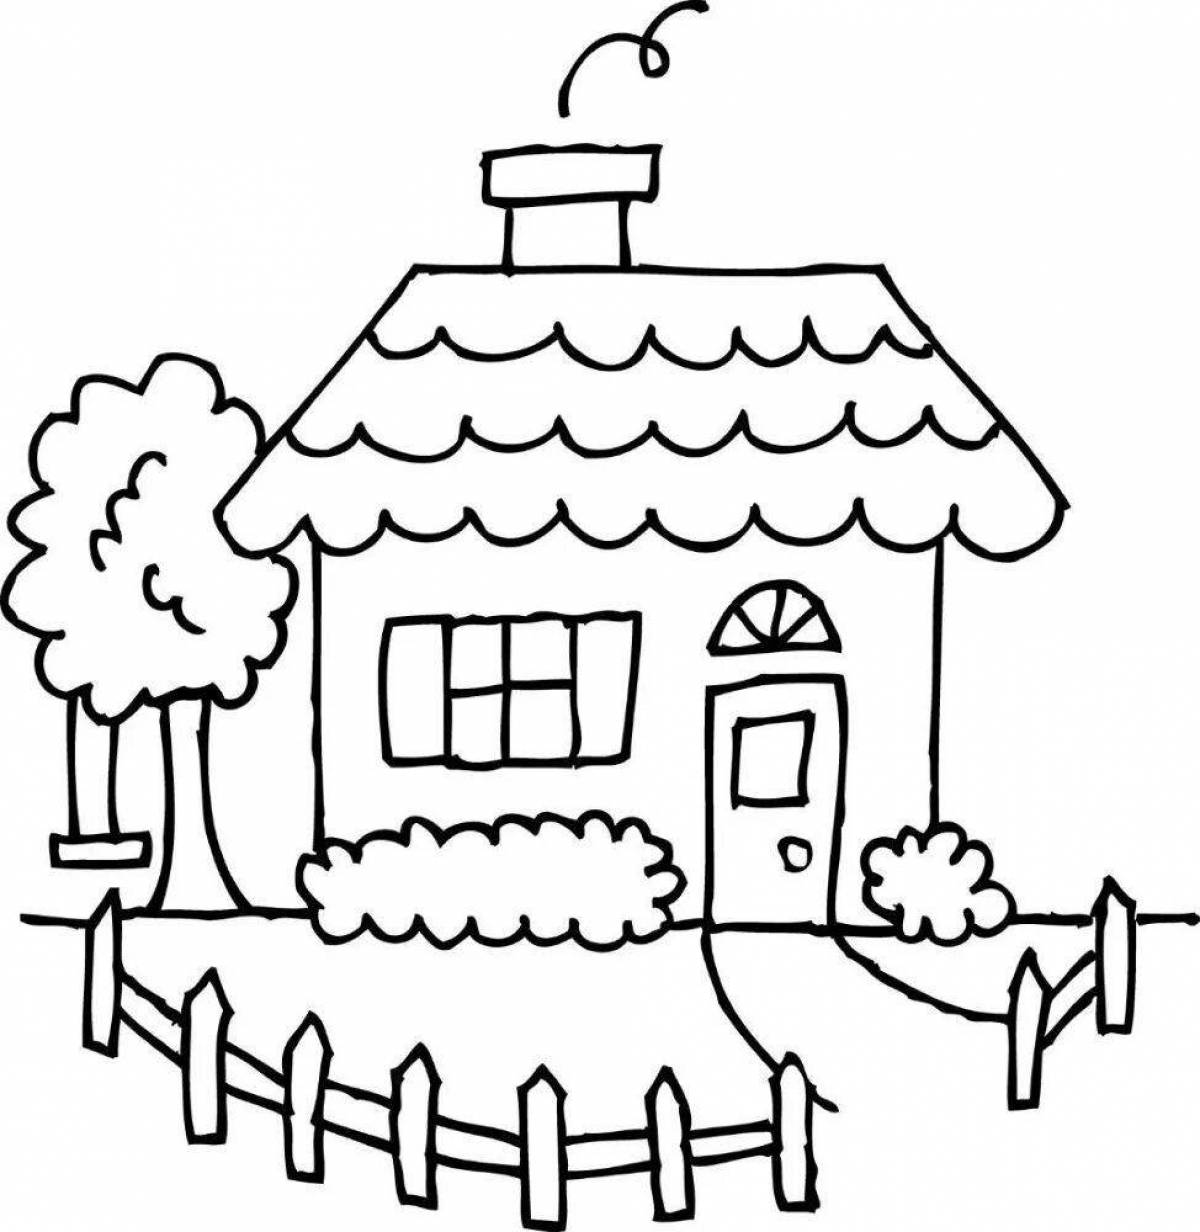 Coloring pages shining houses for kids